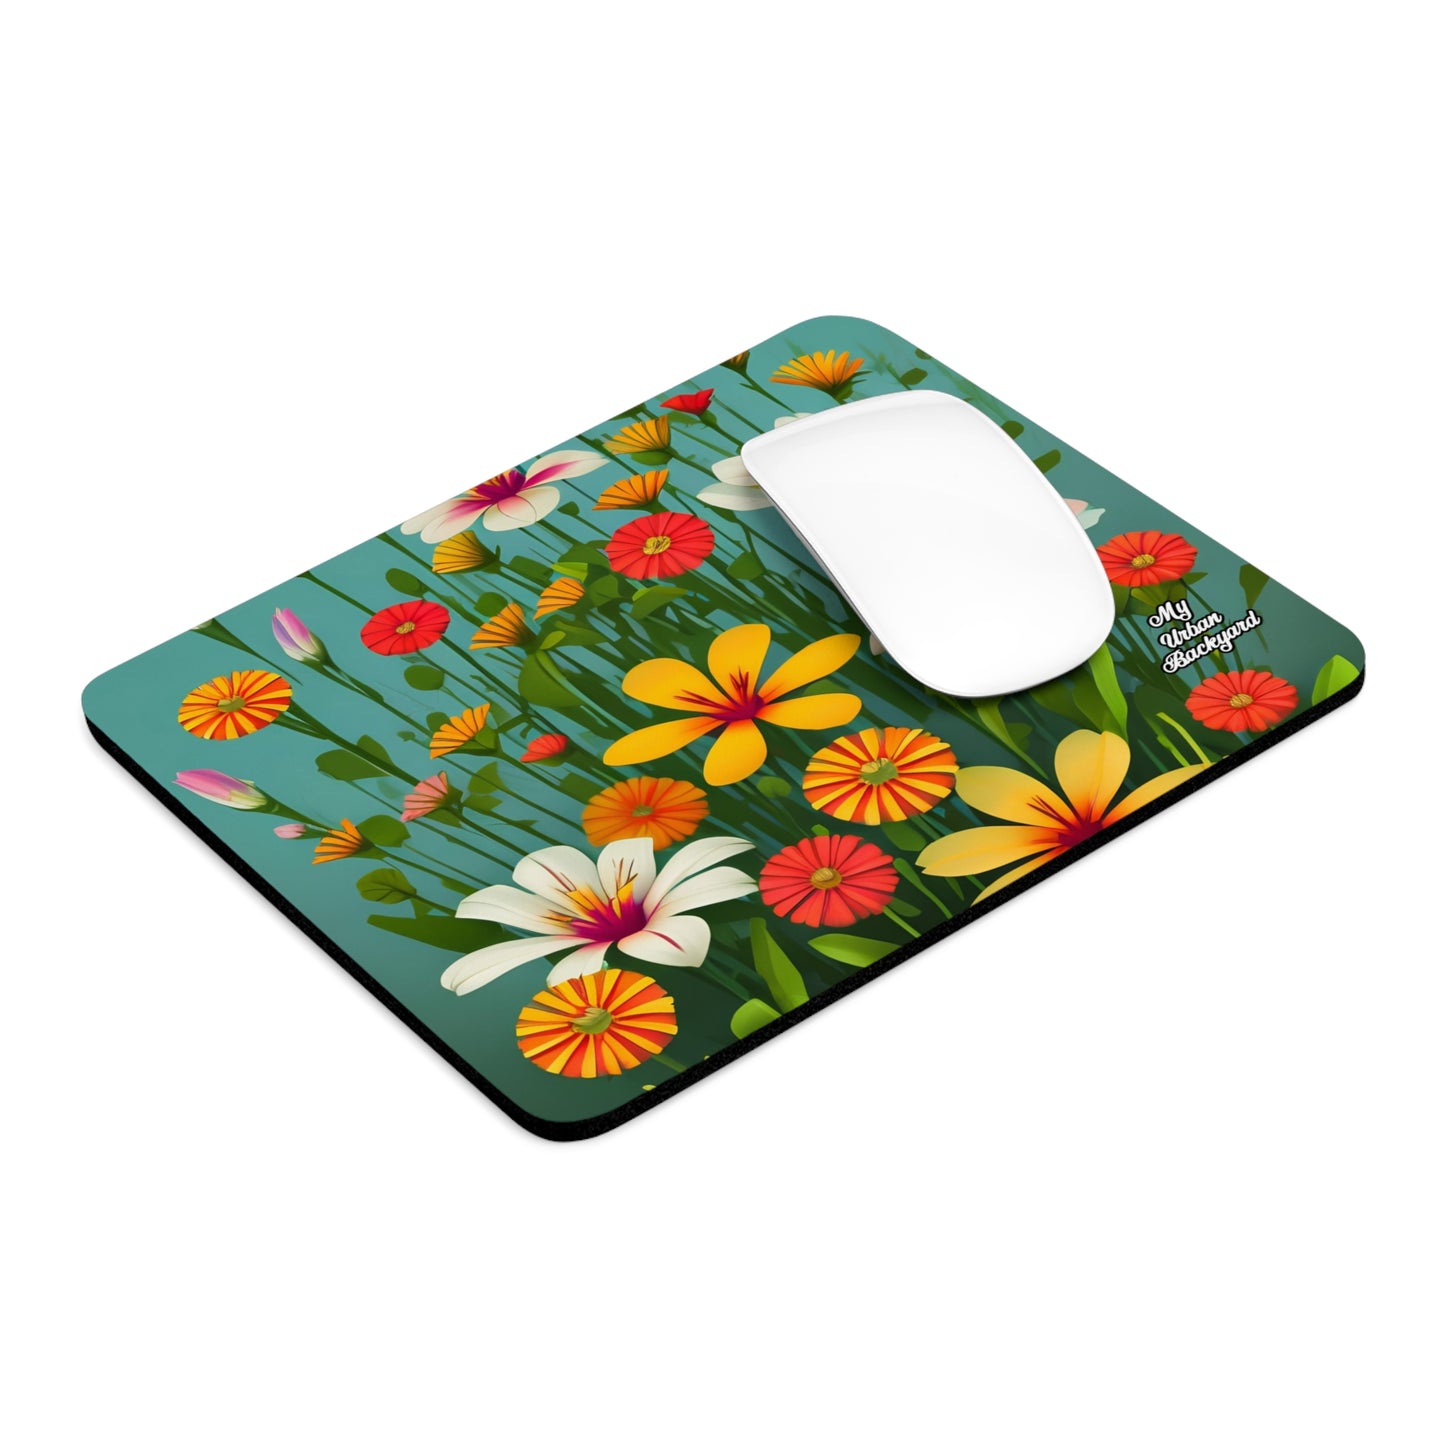 Computer Mouse Pad with Non-slip rubber bottom for Home or Office - Wildflowers